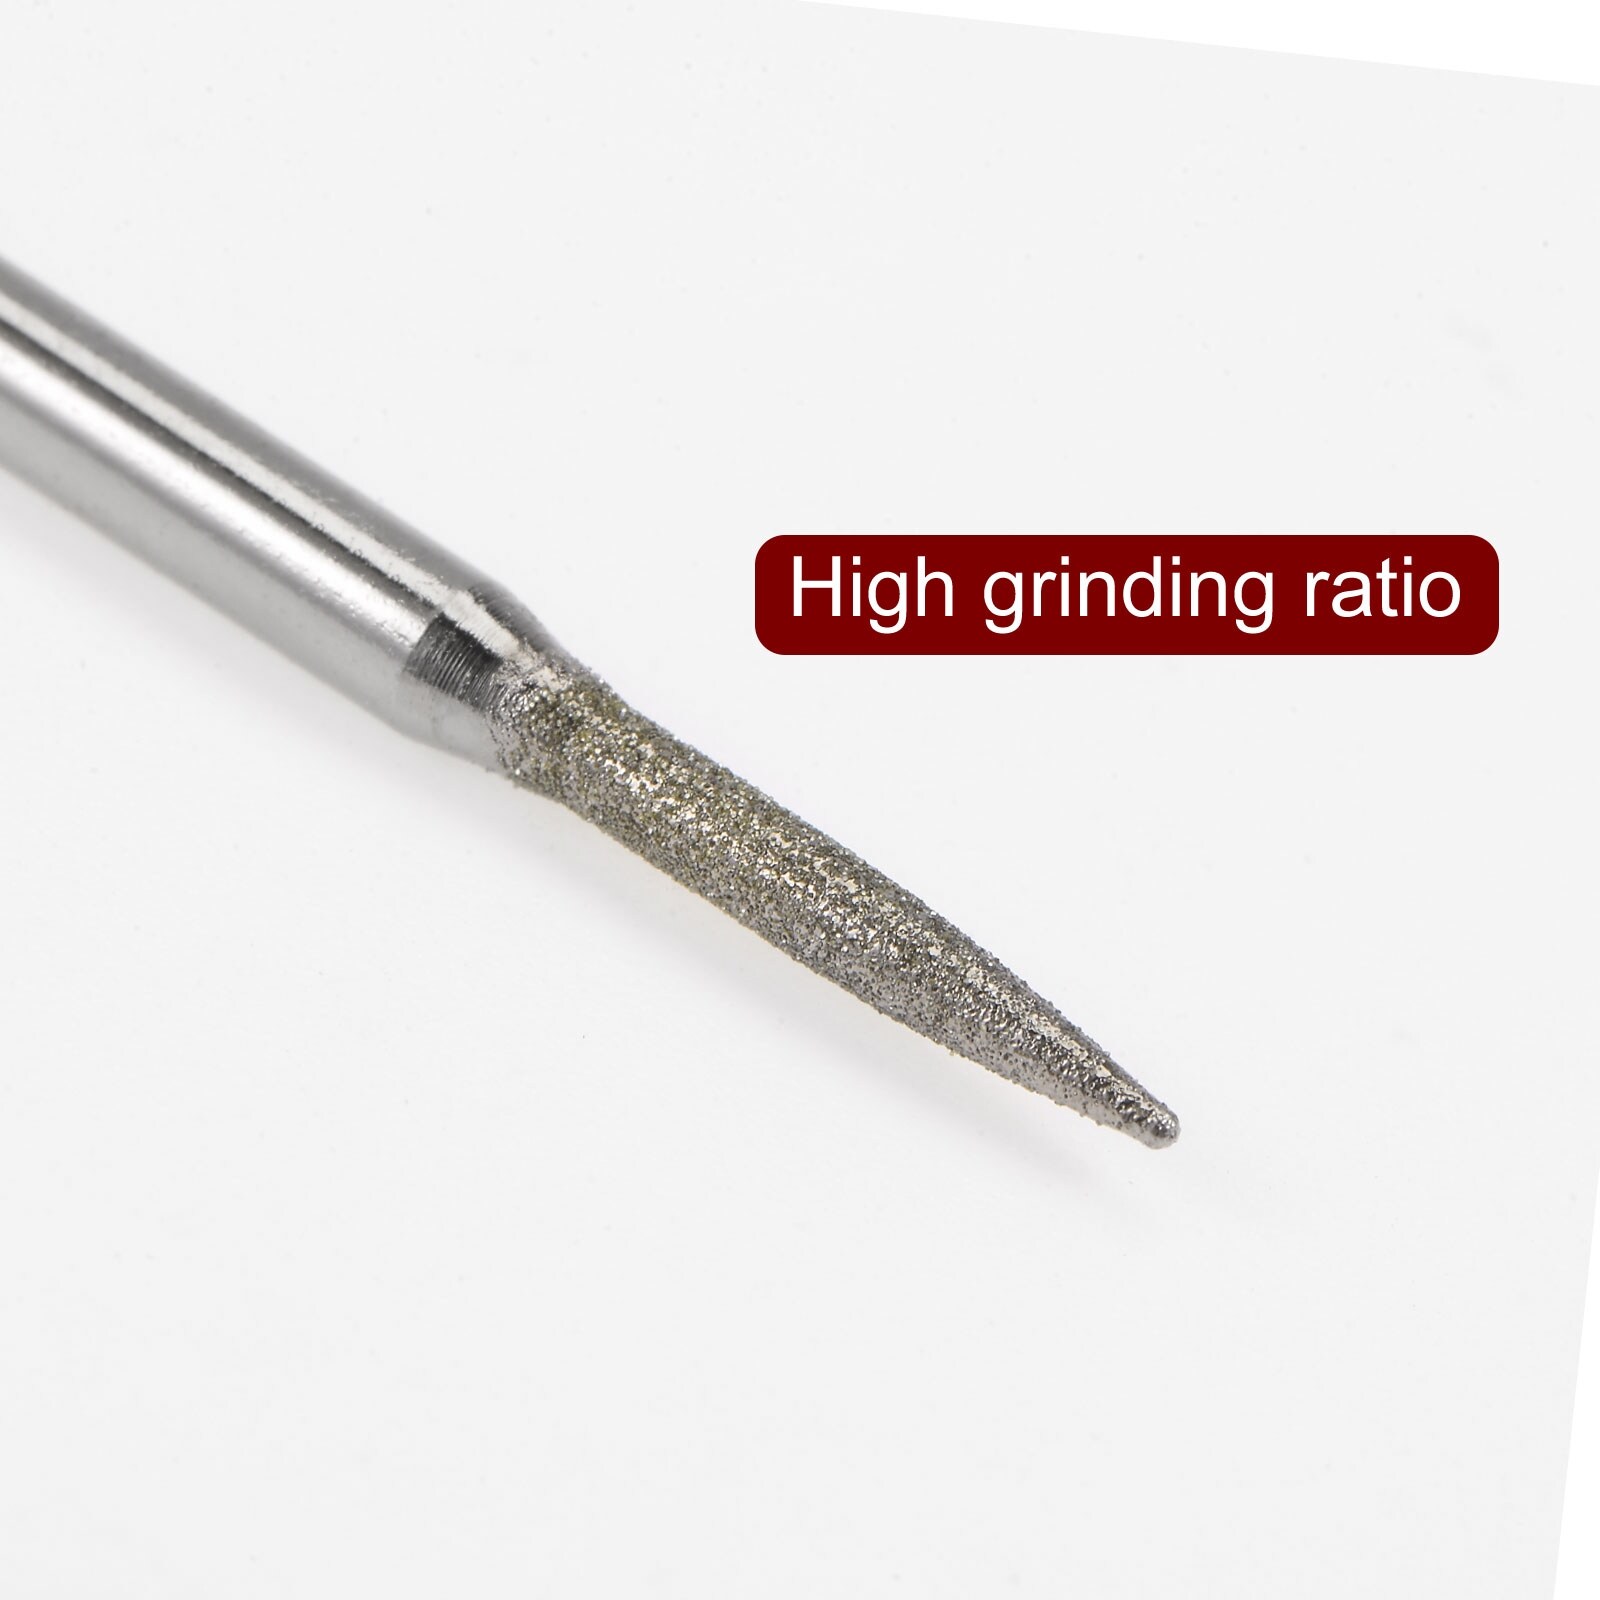 30pcs Diamond Grinding Carving Bits 2mm Tapered Shape Head Mounted Point - Silver Tone